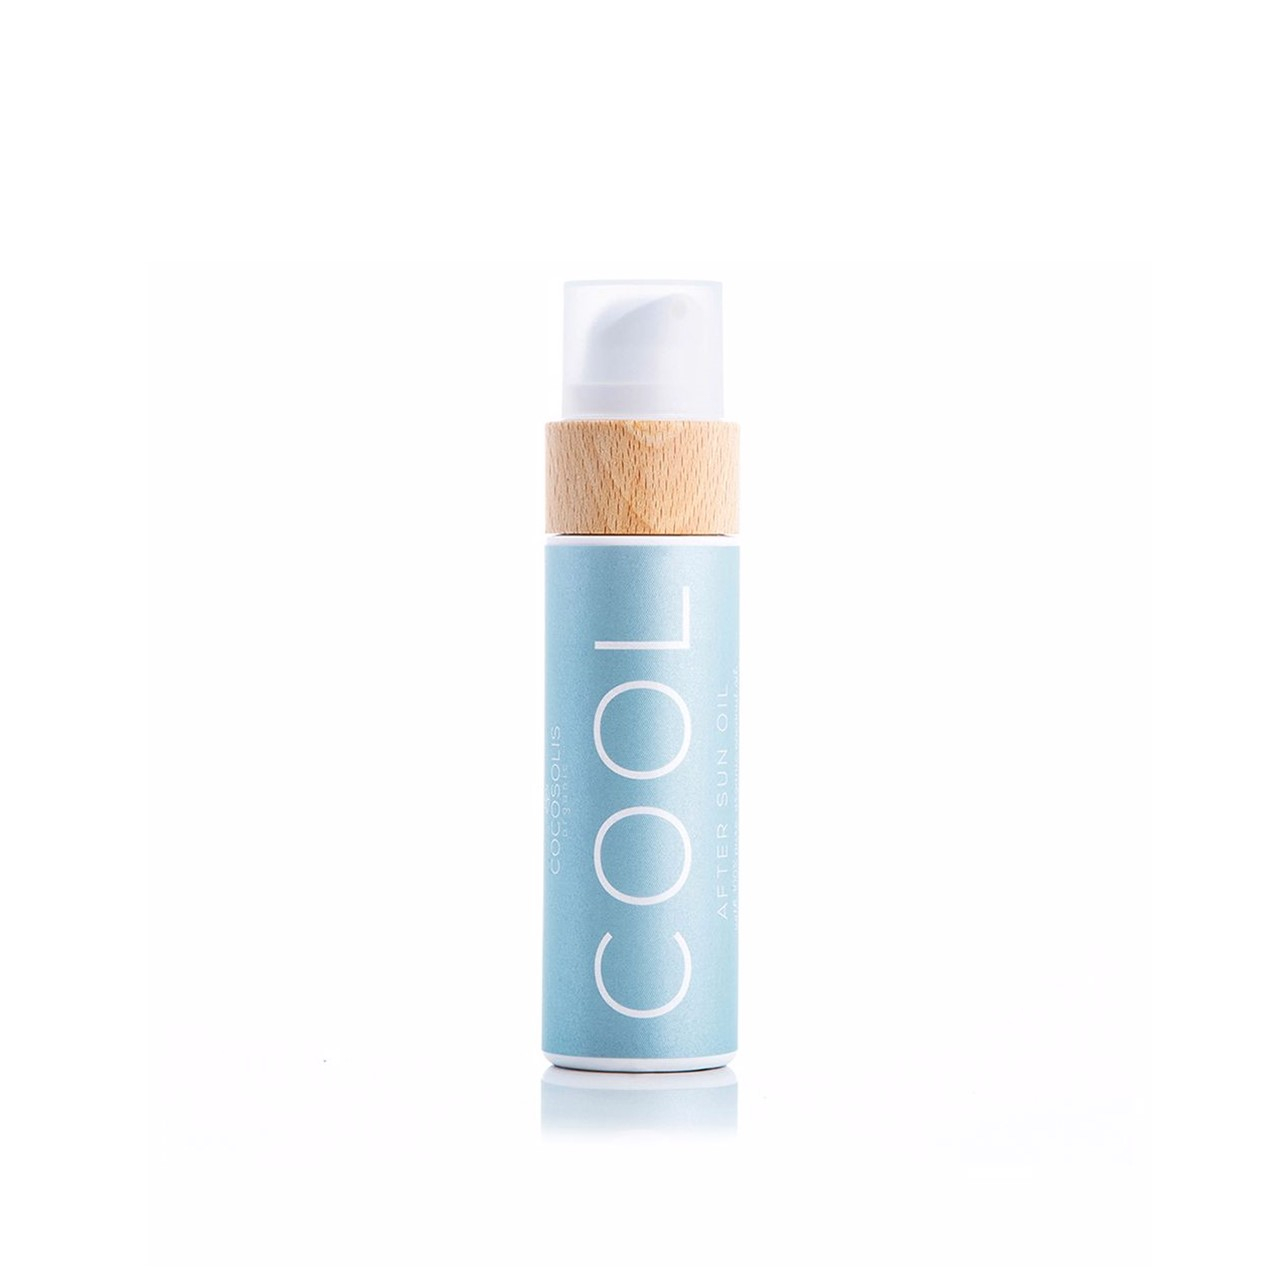 COCOSOLIS Cool After Sun Oil 200ml